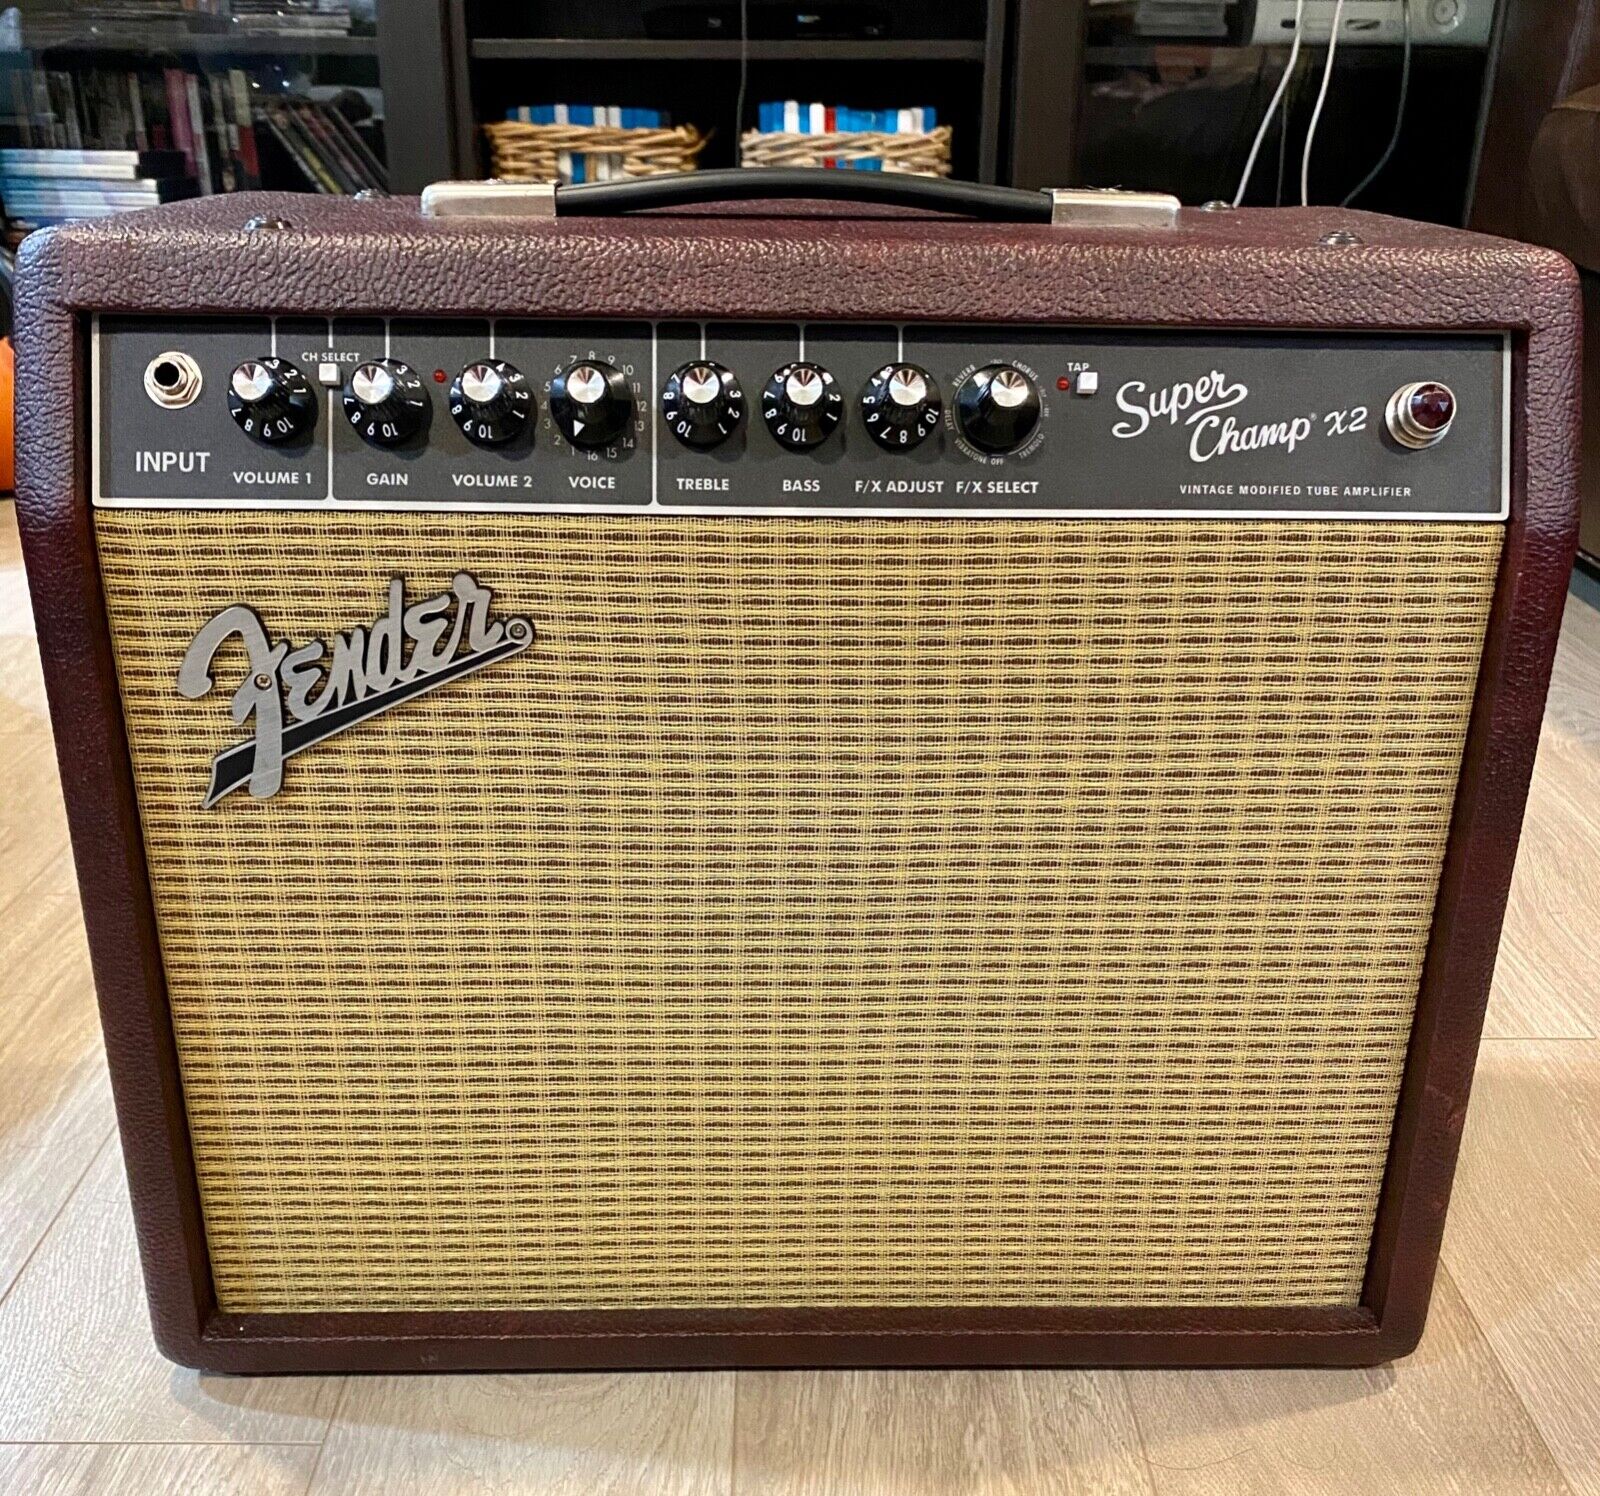 Fender Super Champ FSR 1x10" Tube Combo Amp - Wine Red Sweetwater Exc for Sale - Fleetwoodmac.net